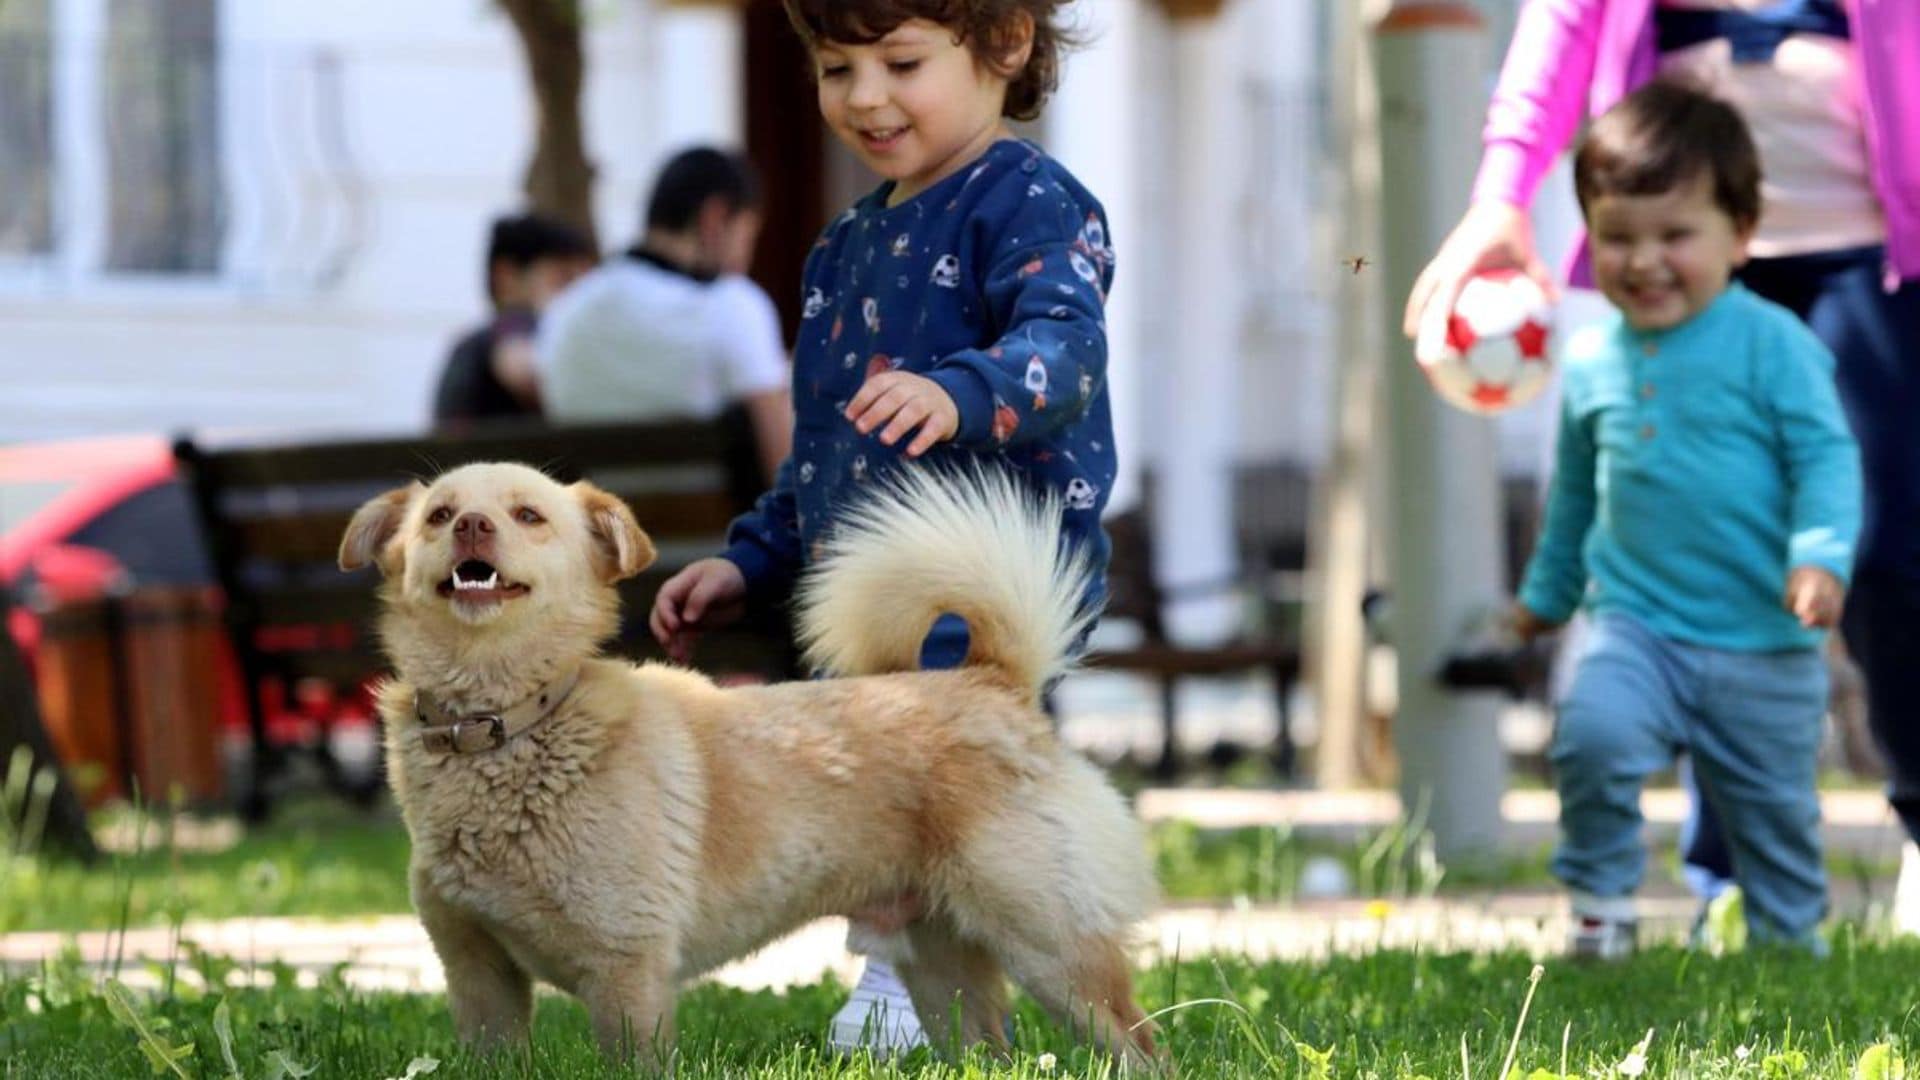 Top 10 best dog friendly cities in the United States: Is your city on the list?